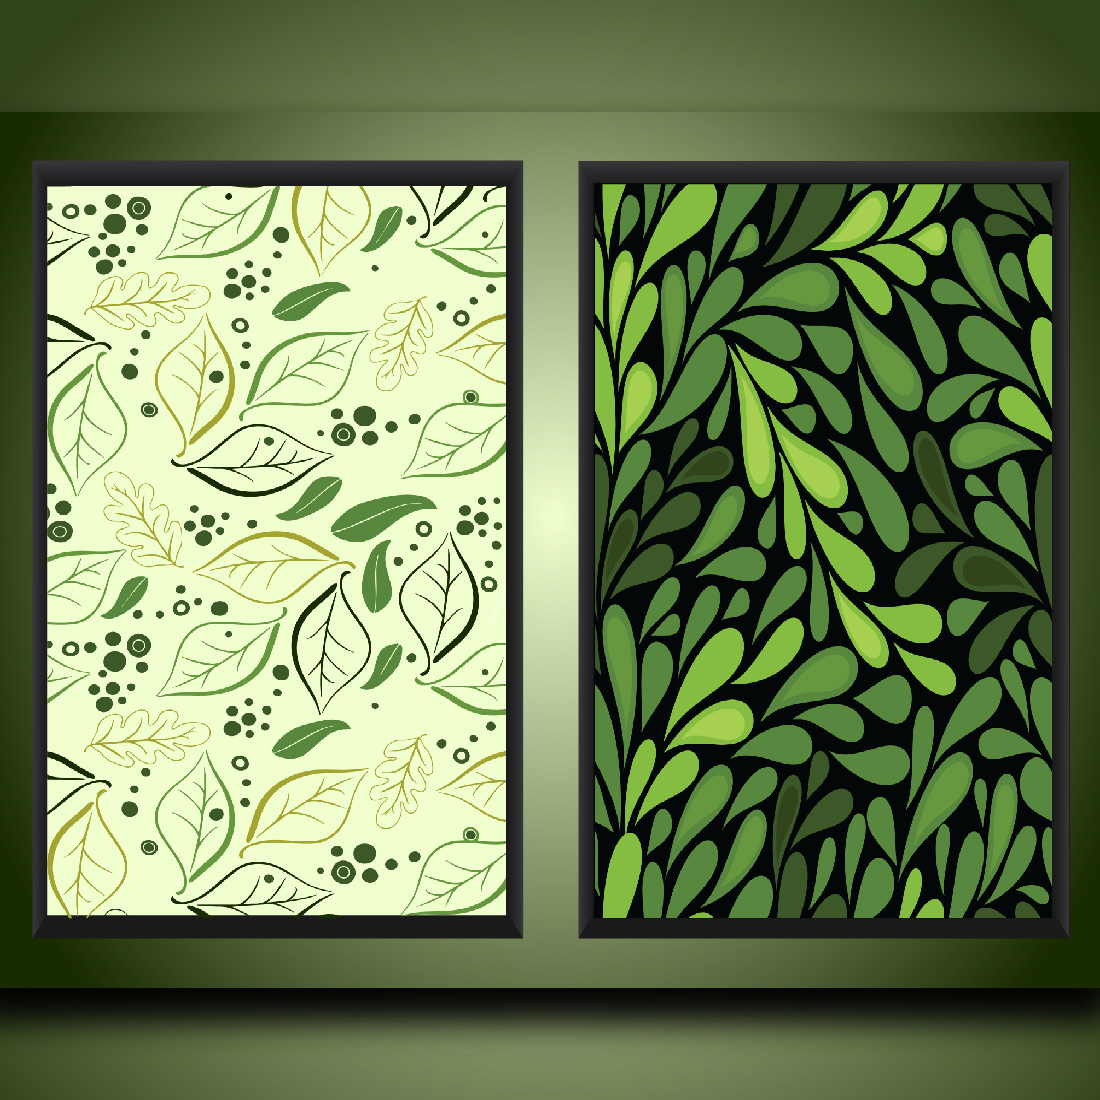 Green Leaves Design Patterns cover image.